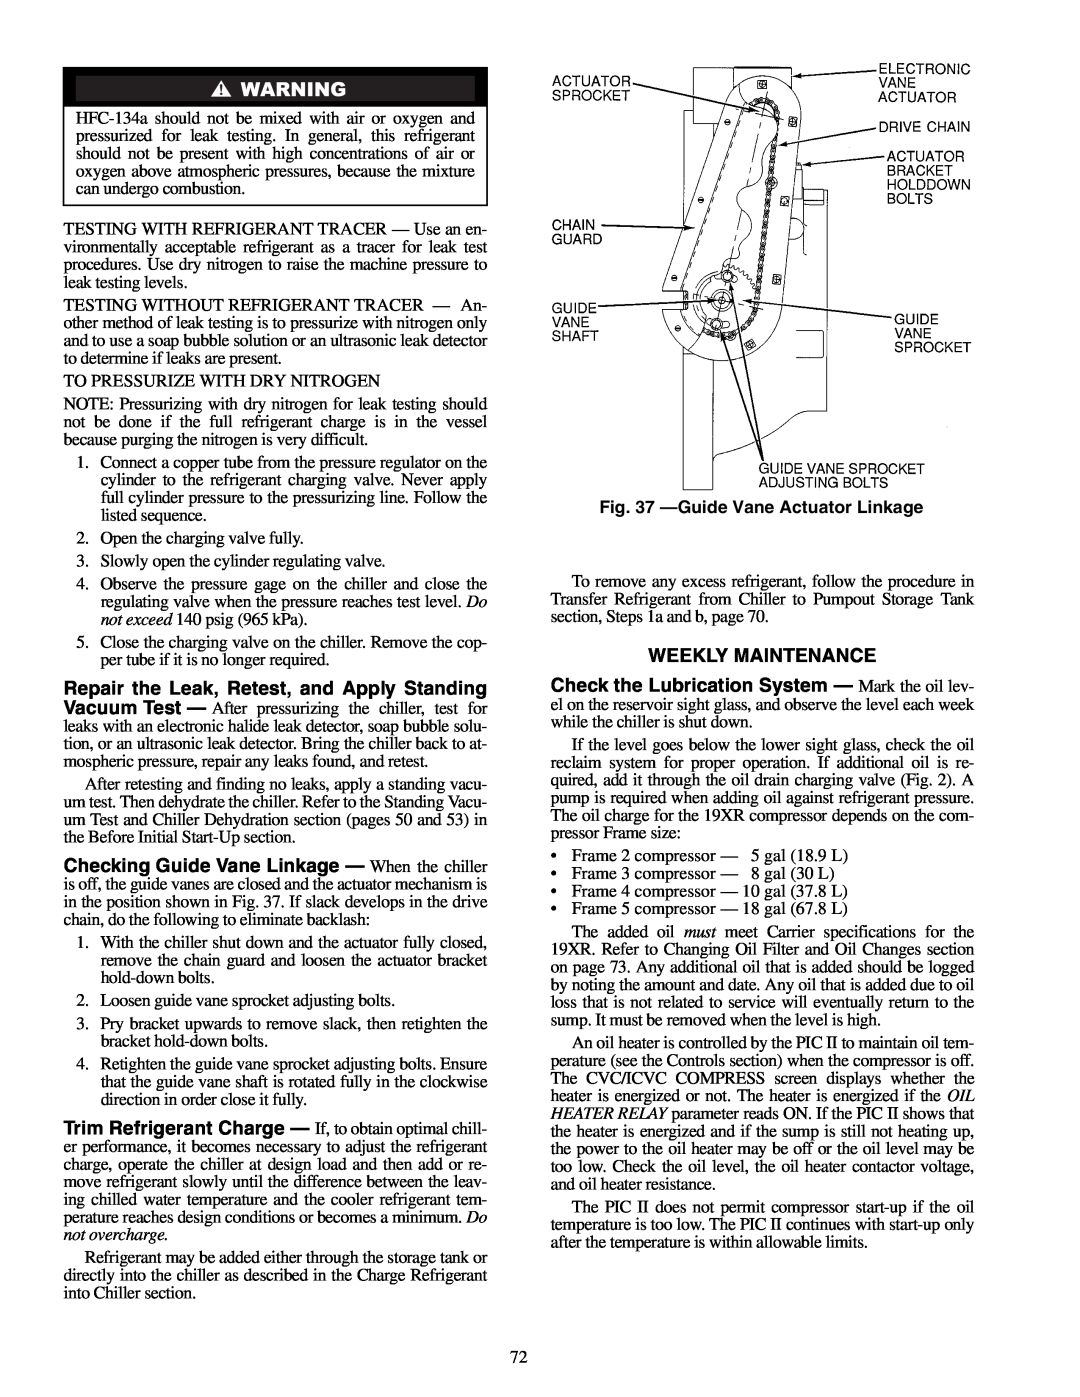 Carrier 19XR, XRV specifications Weekly Maintenance, Guide Vane Actuator Linkage 